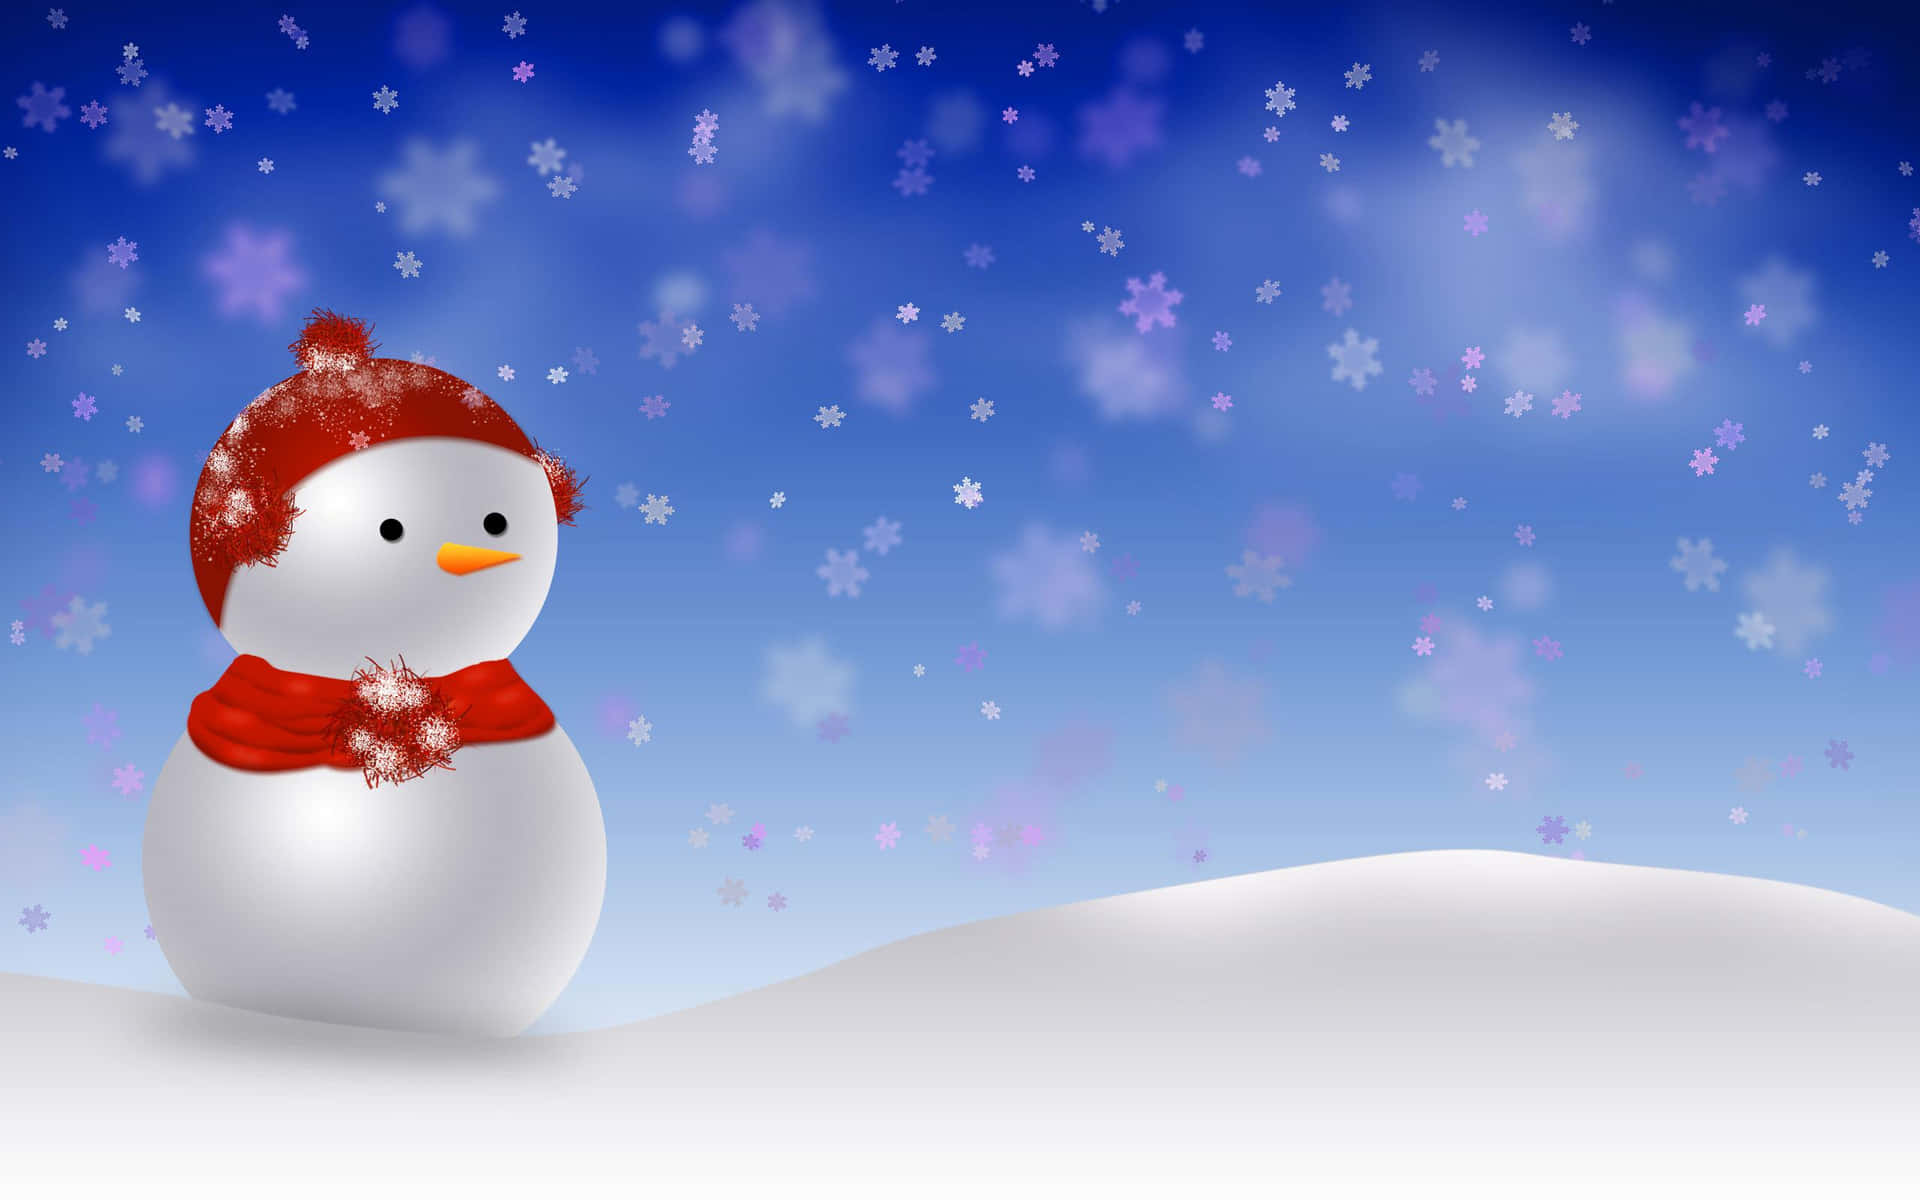 A jolly Snowman, perfect for the winter holidays!